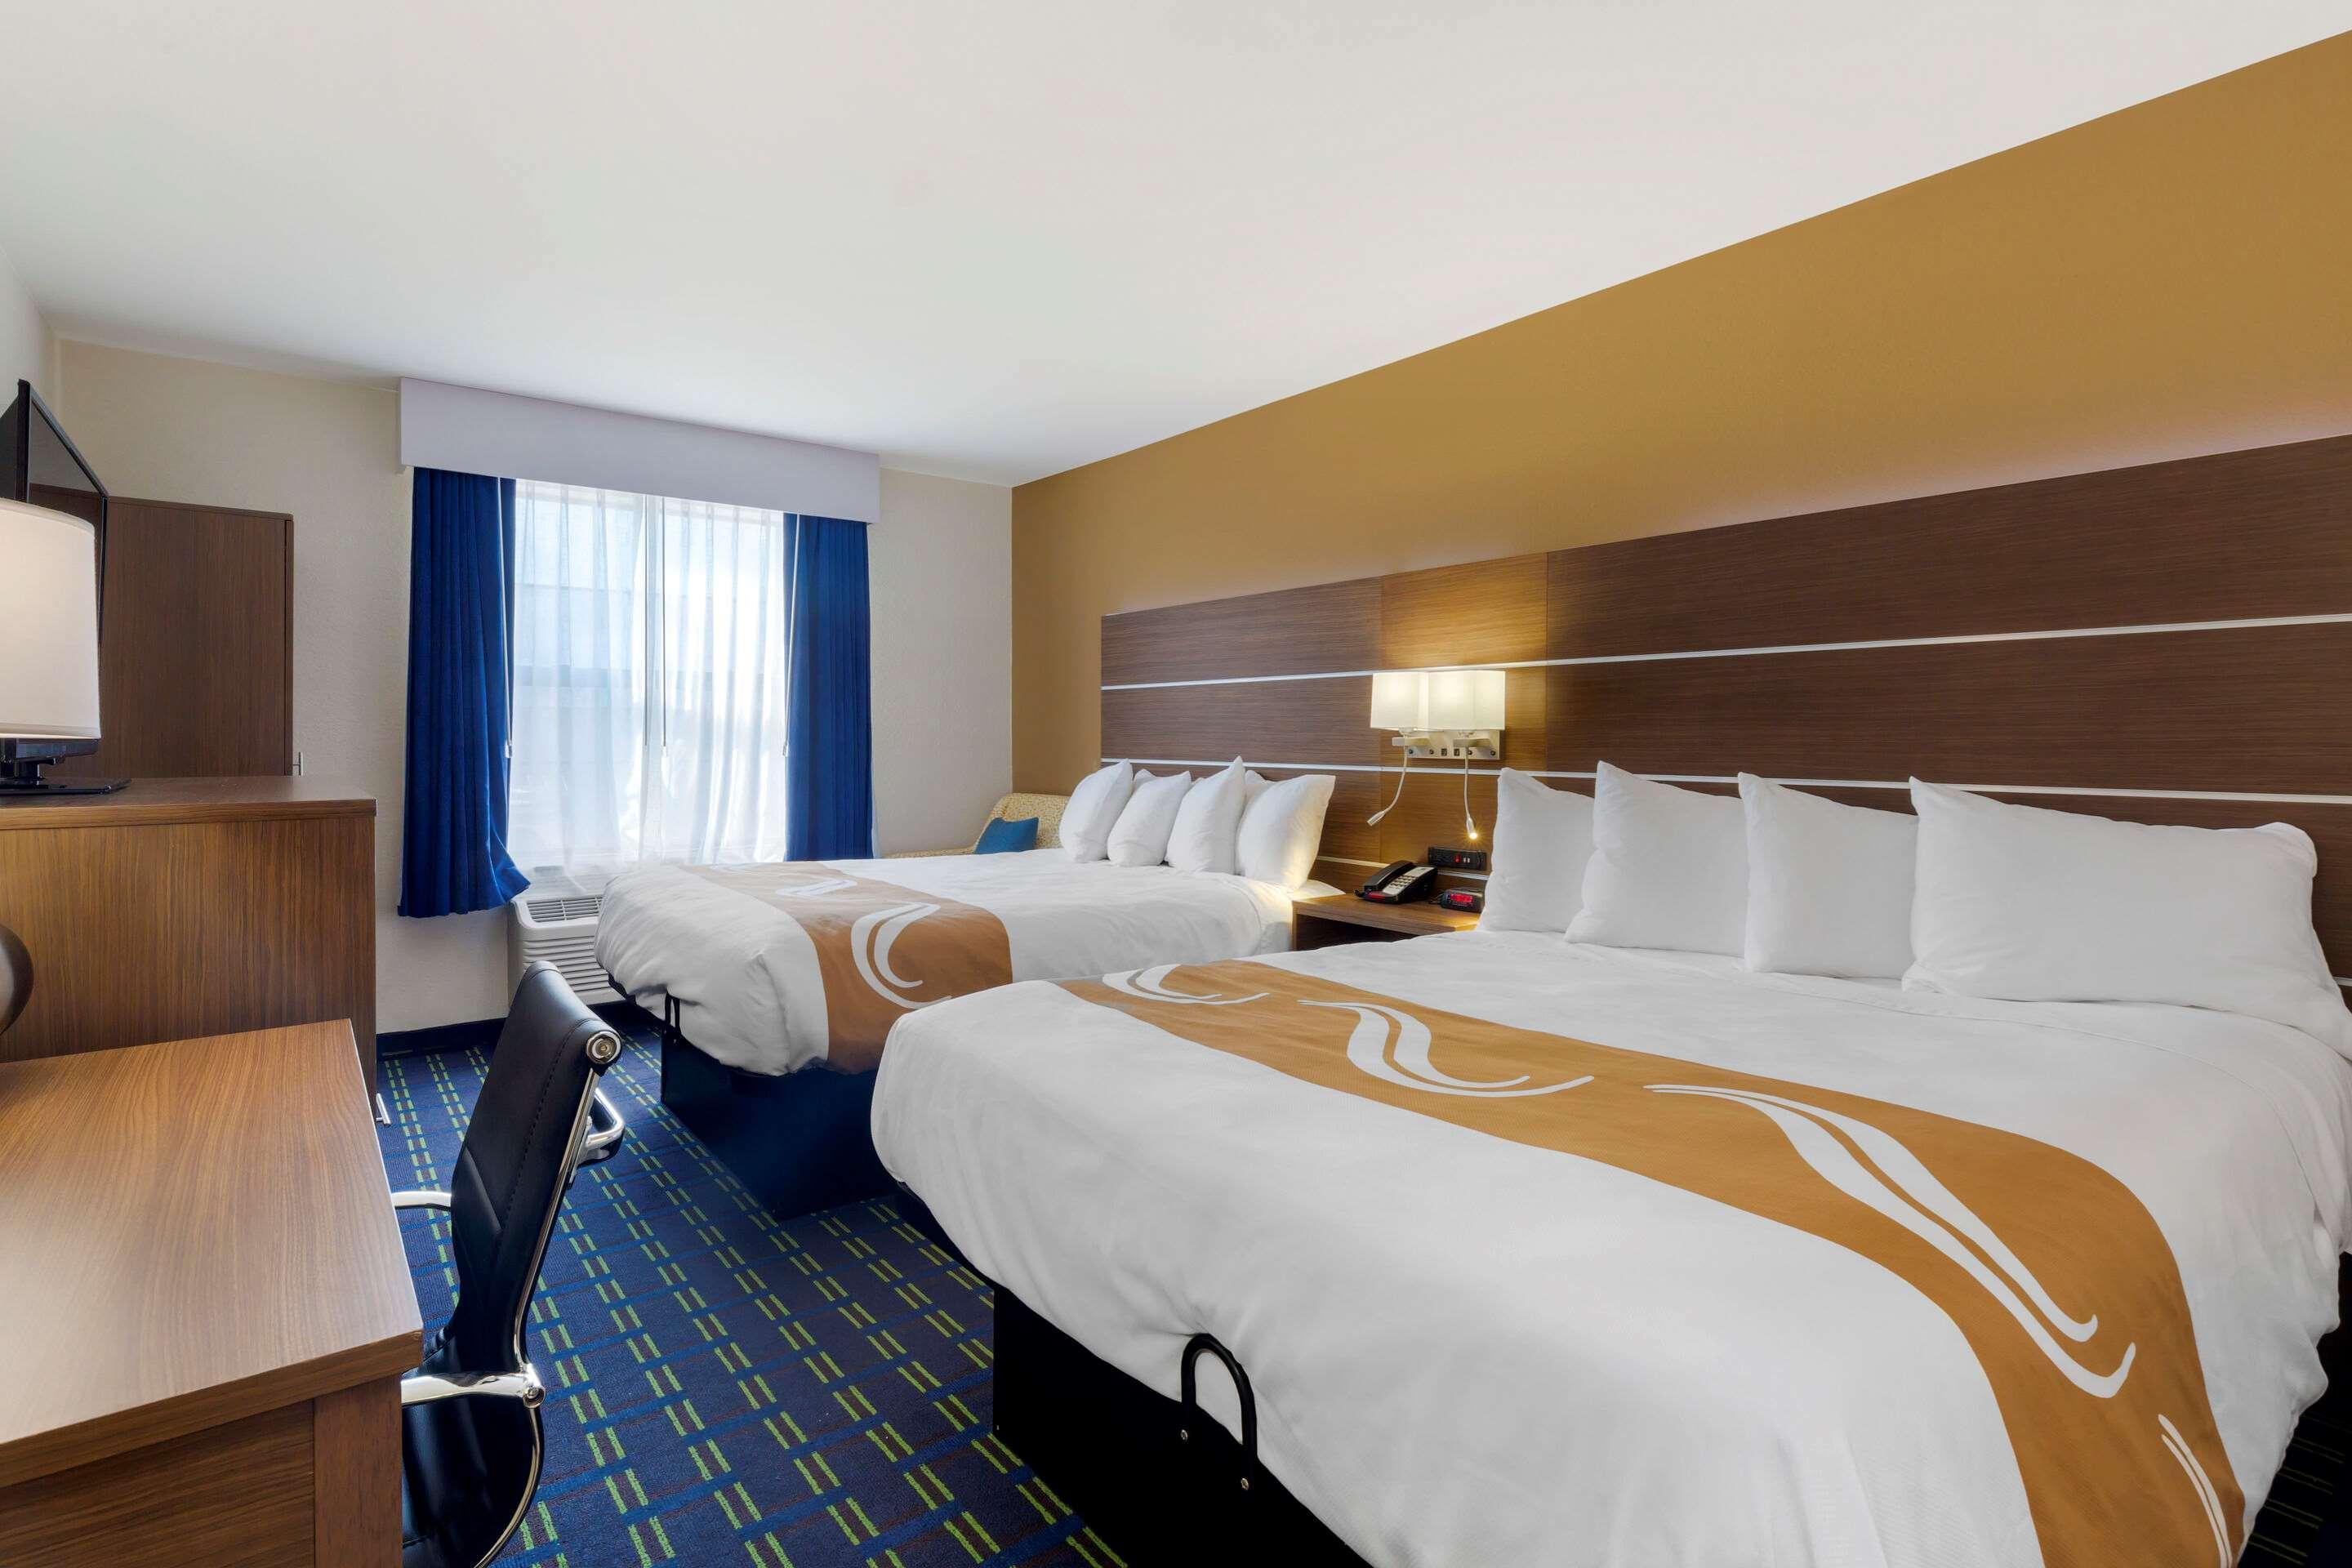 HOTEL QUALITY INN LEE, MA 2* (United States) - from US$ 89 | BOOKED